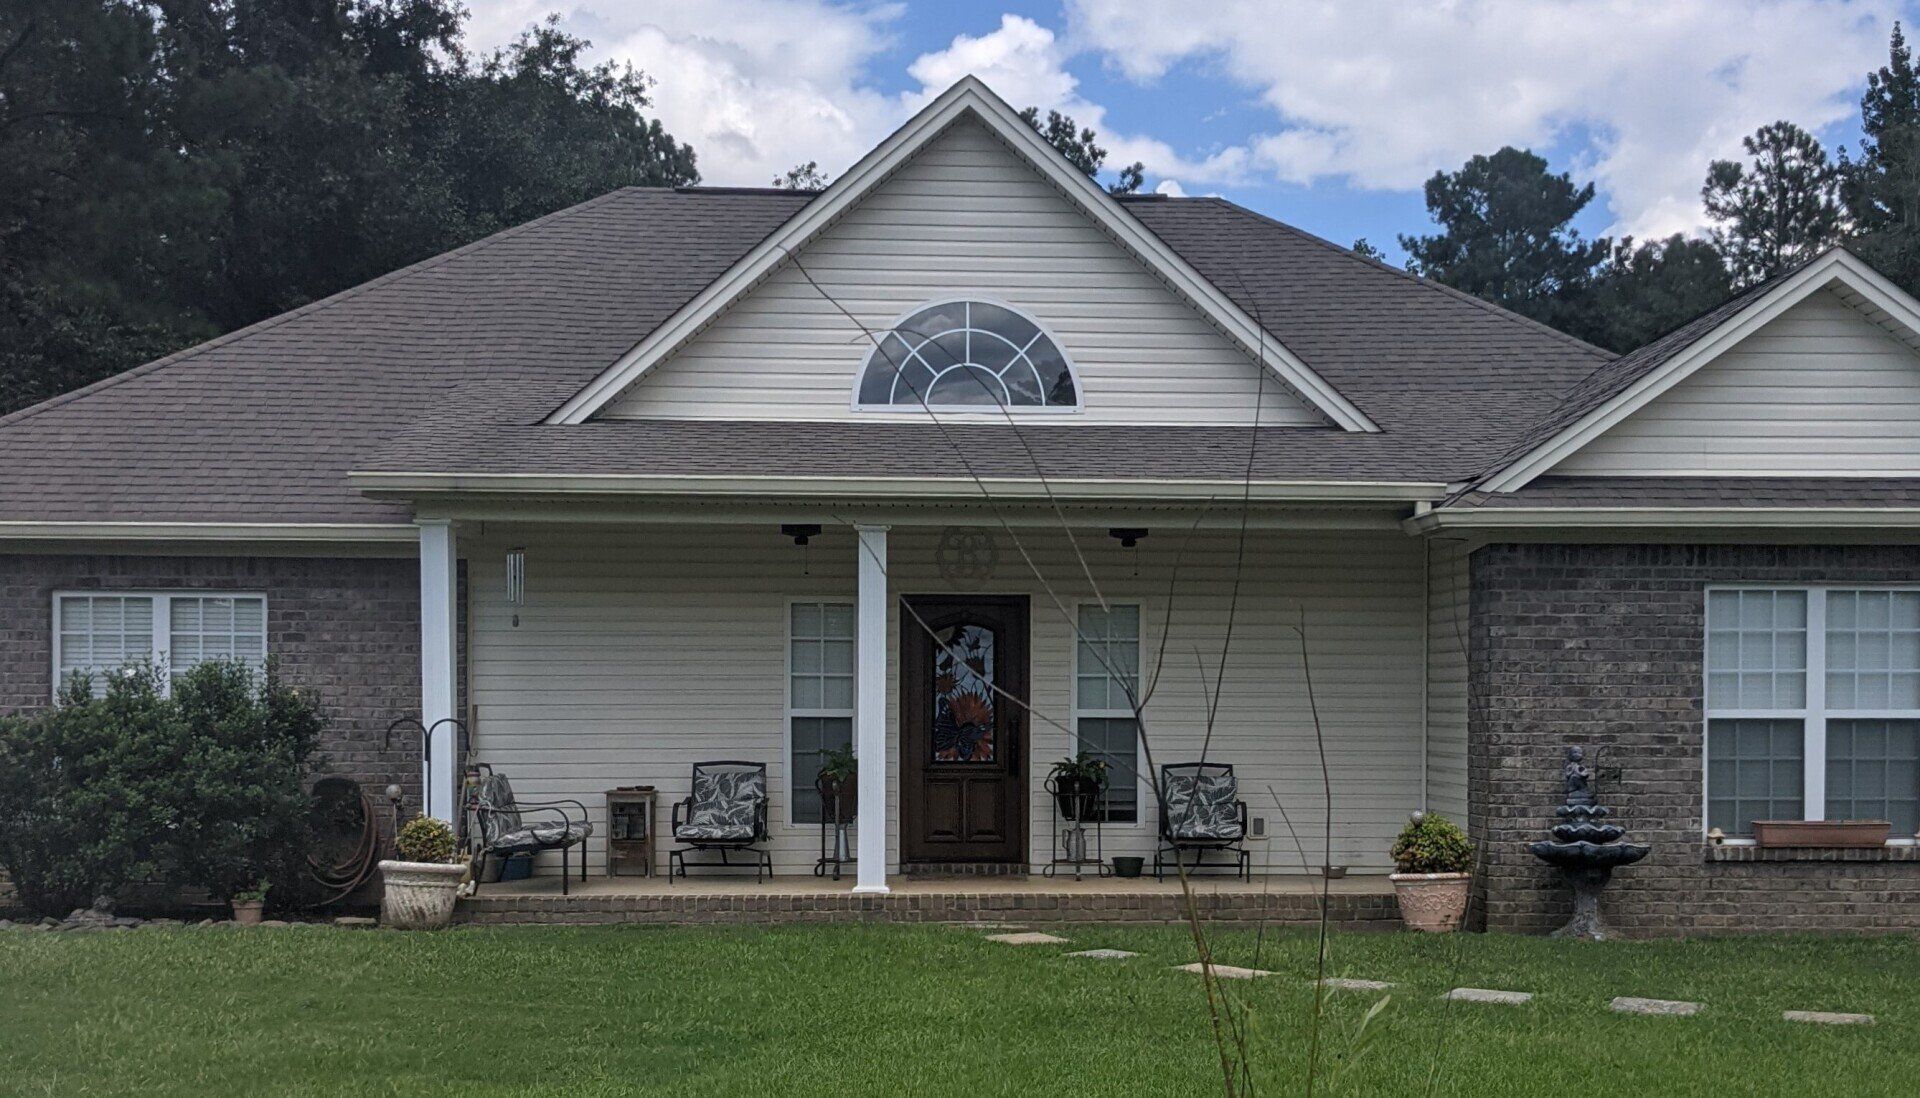 Residential tinting in Wetumpka, AL - Heat Gain was tremendous, causing more than 5 degree temperature separation, inside this home in Wetumpka, AL